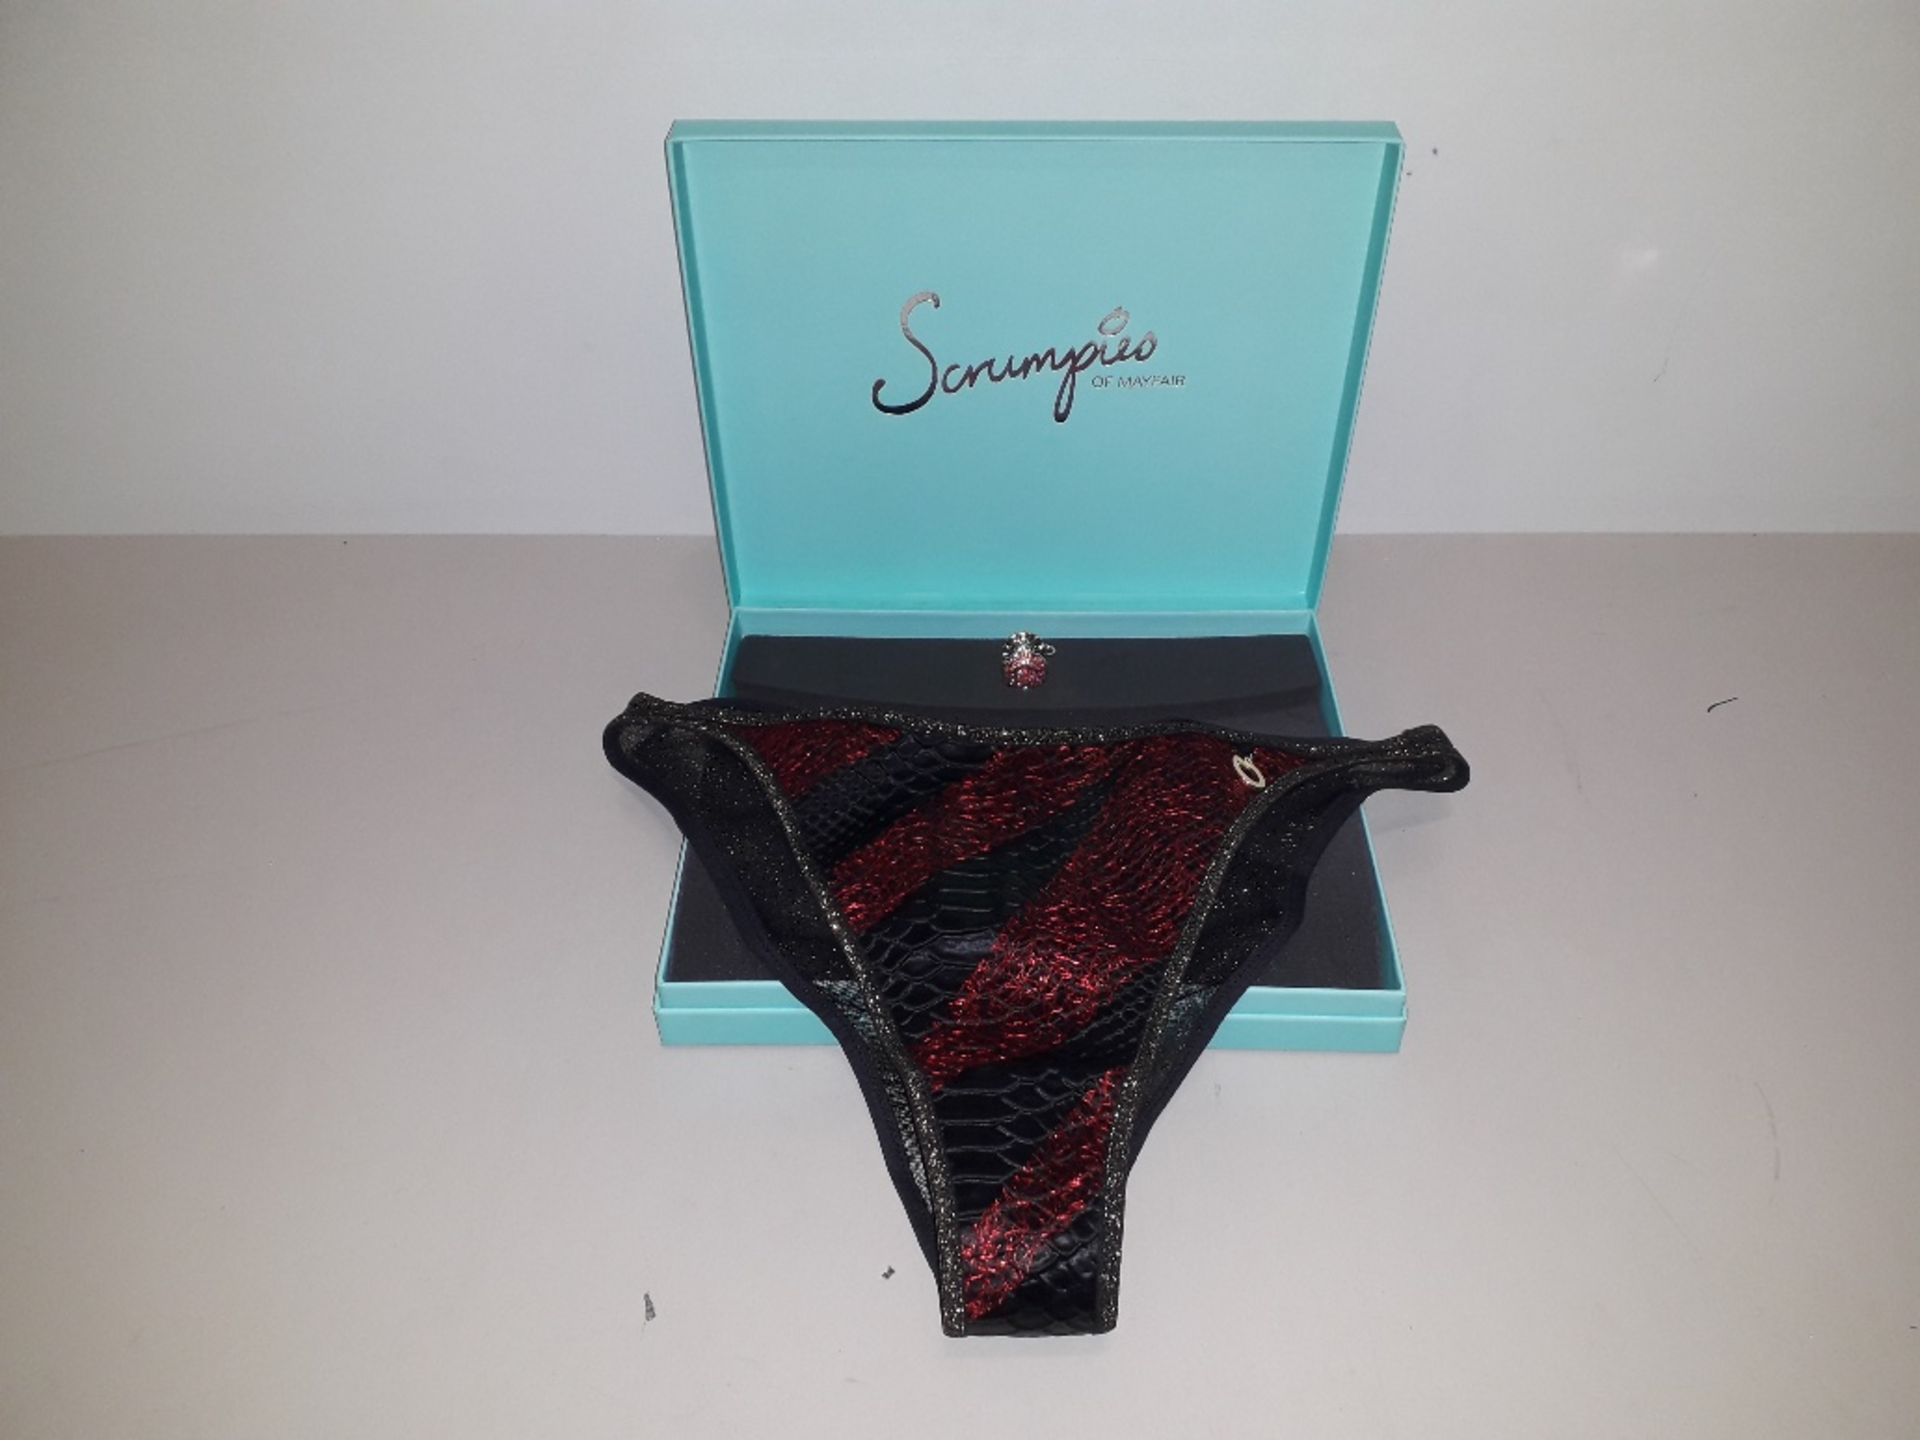 50 X SCRUMPIES OF MAYFAIR DRAGONSNAP FIRE TANGA BRIEFS - SIZES 8-16 (1-5) WITH BAG OF 50 CHARMS